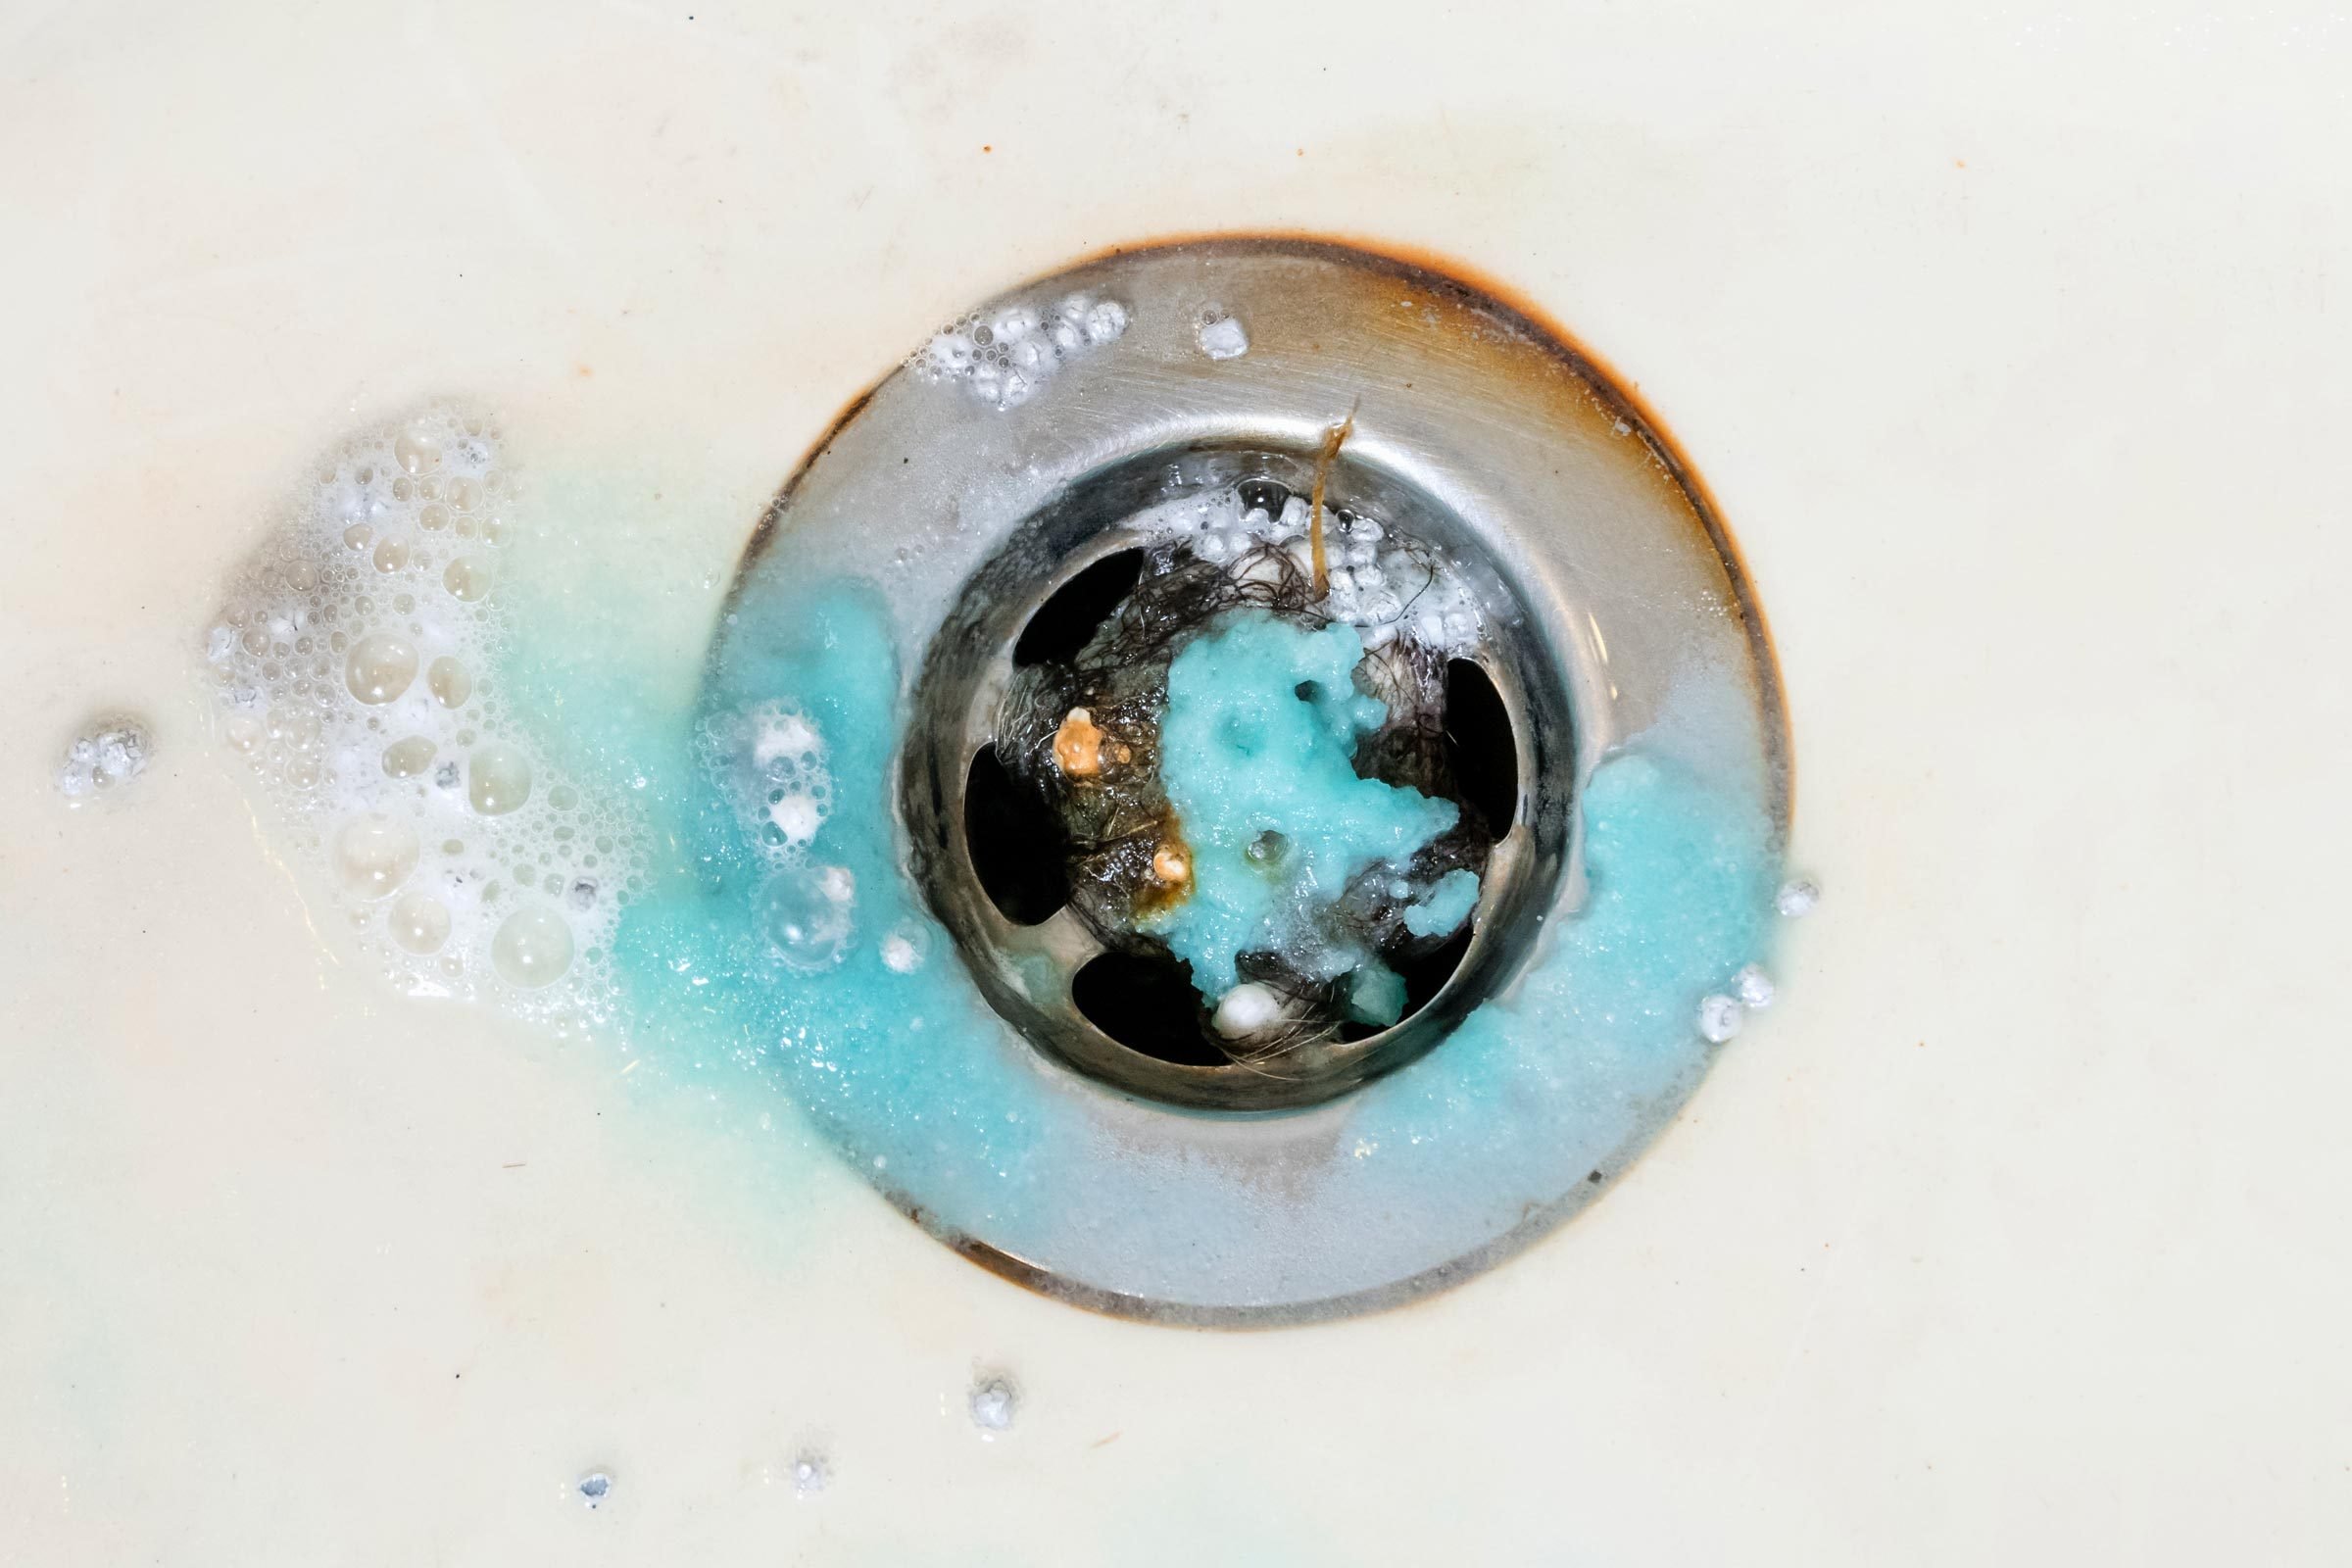 Must-knows about the Types of Shower Drain Covers